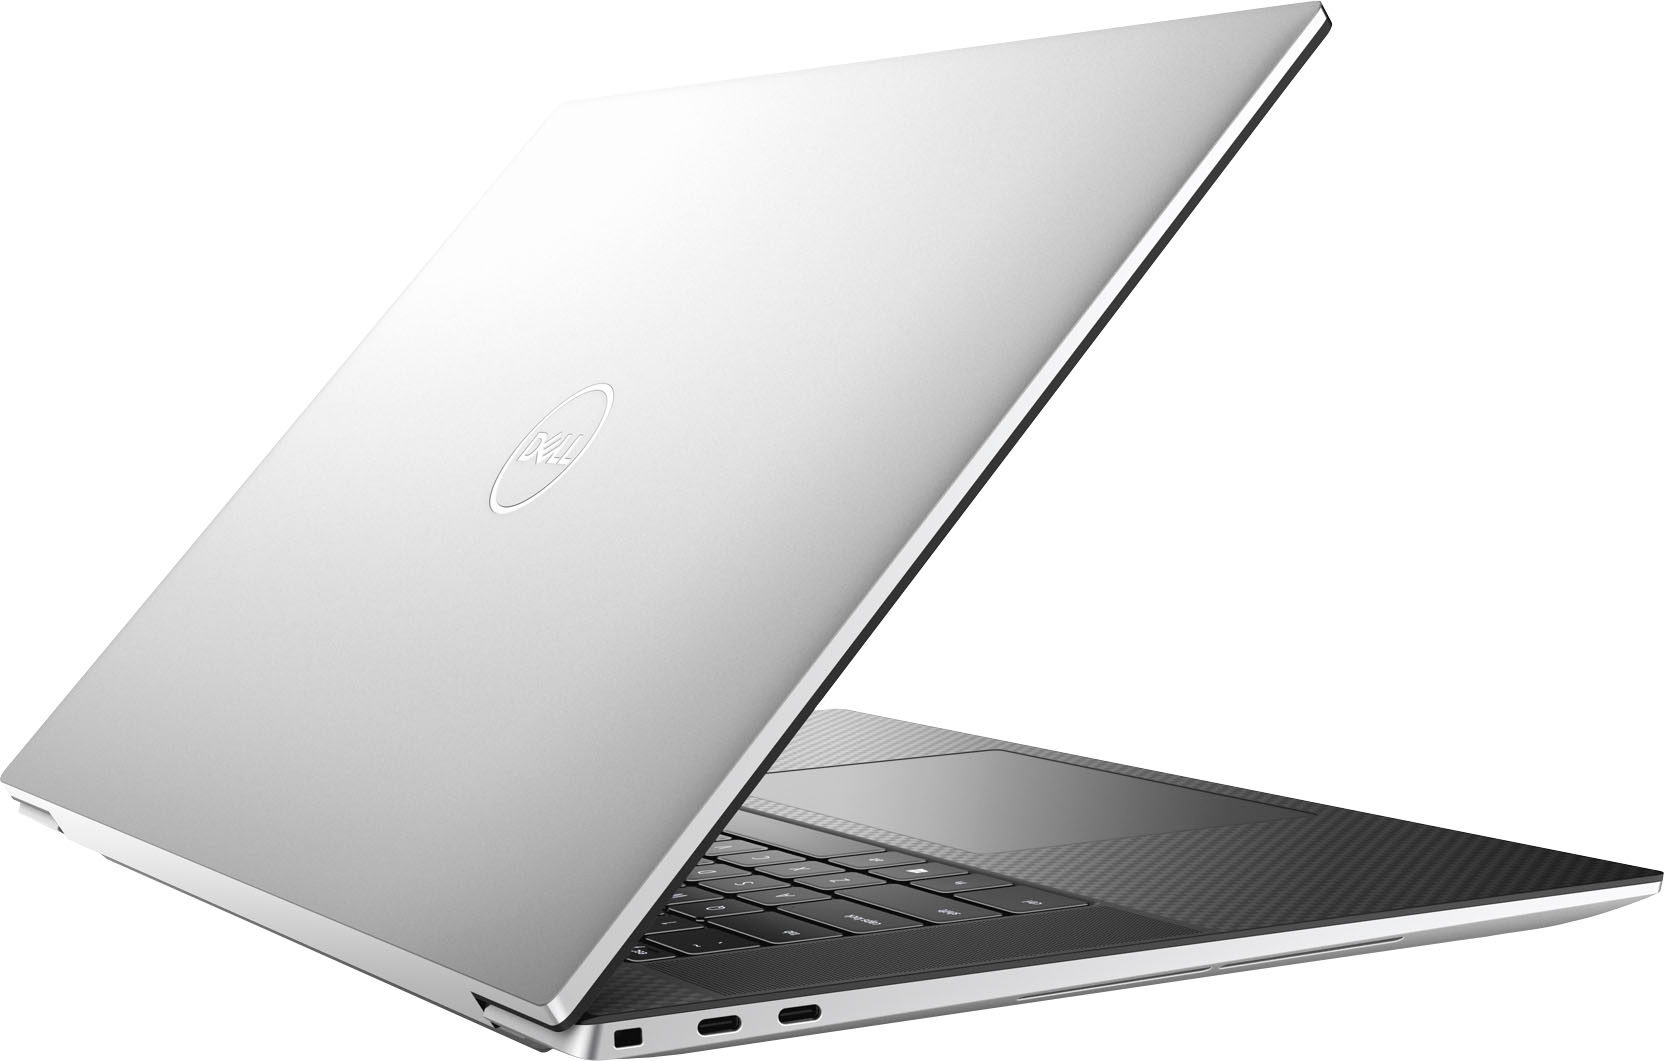 Dell XPS 17 17.0" UHD+ Touch Laptop Intel Core i7 Memory NVIDIA GeForce RTX 4070 1TB SSD Platinum Silver XPS9730-7695SLV-PUS - Best Buy